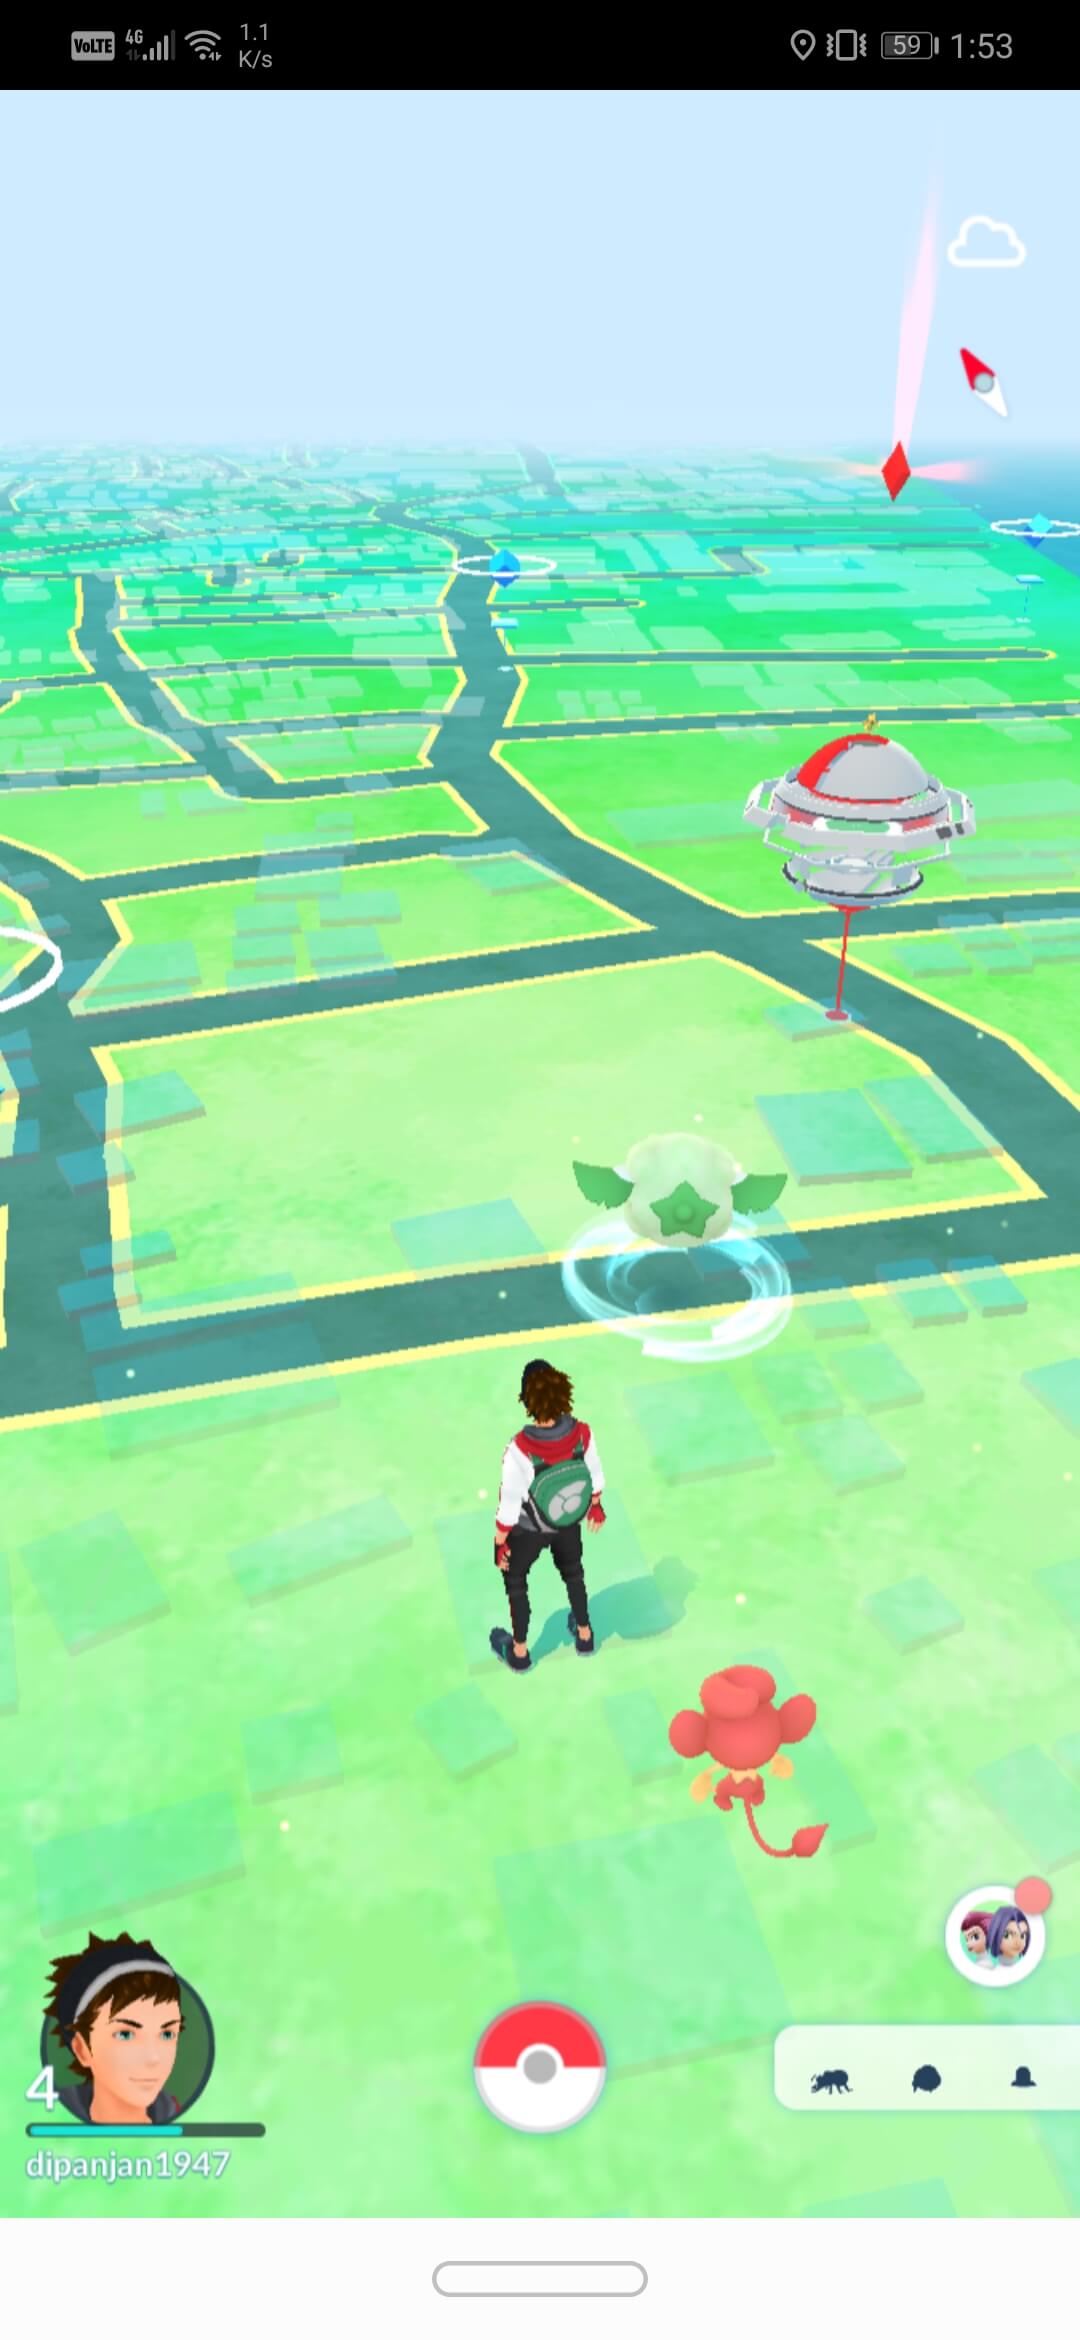 tap on the Pokéball button at the bottom center of the screen.